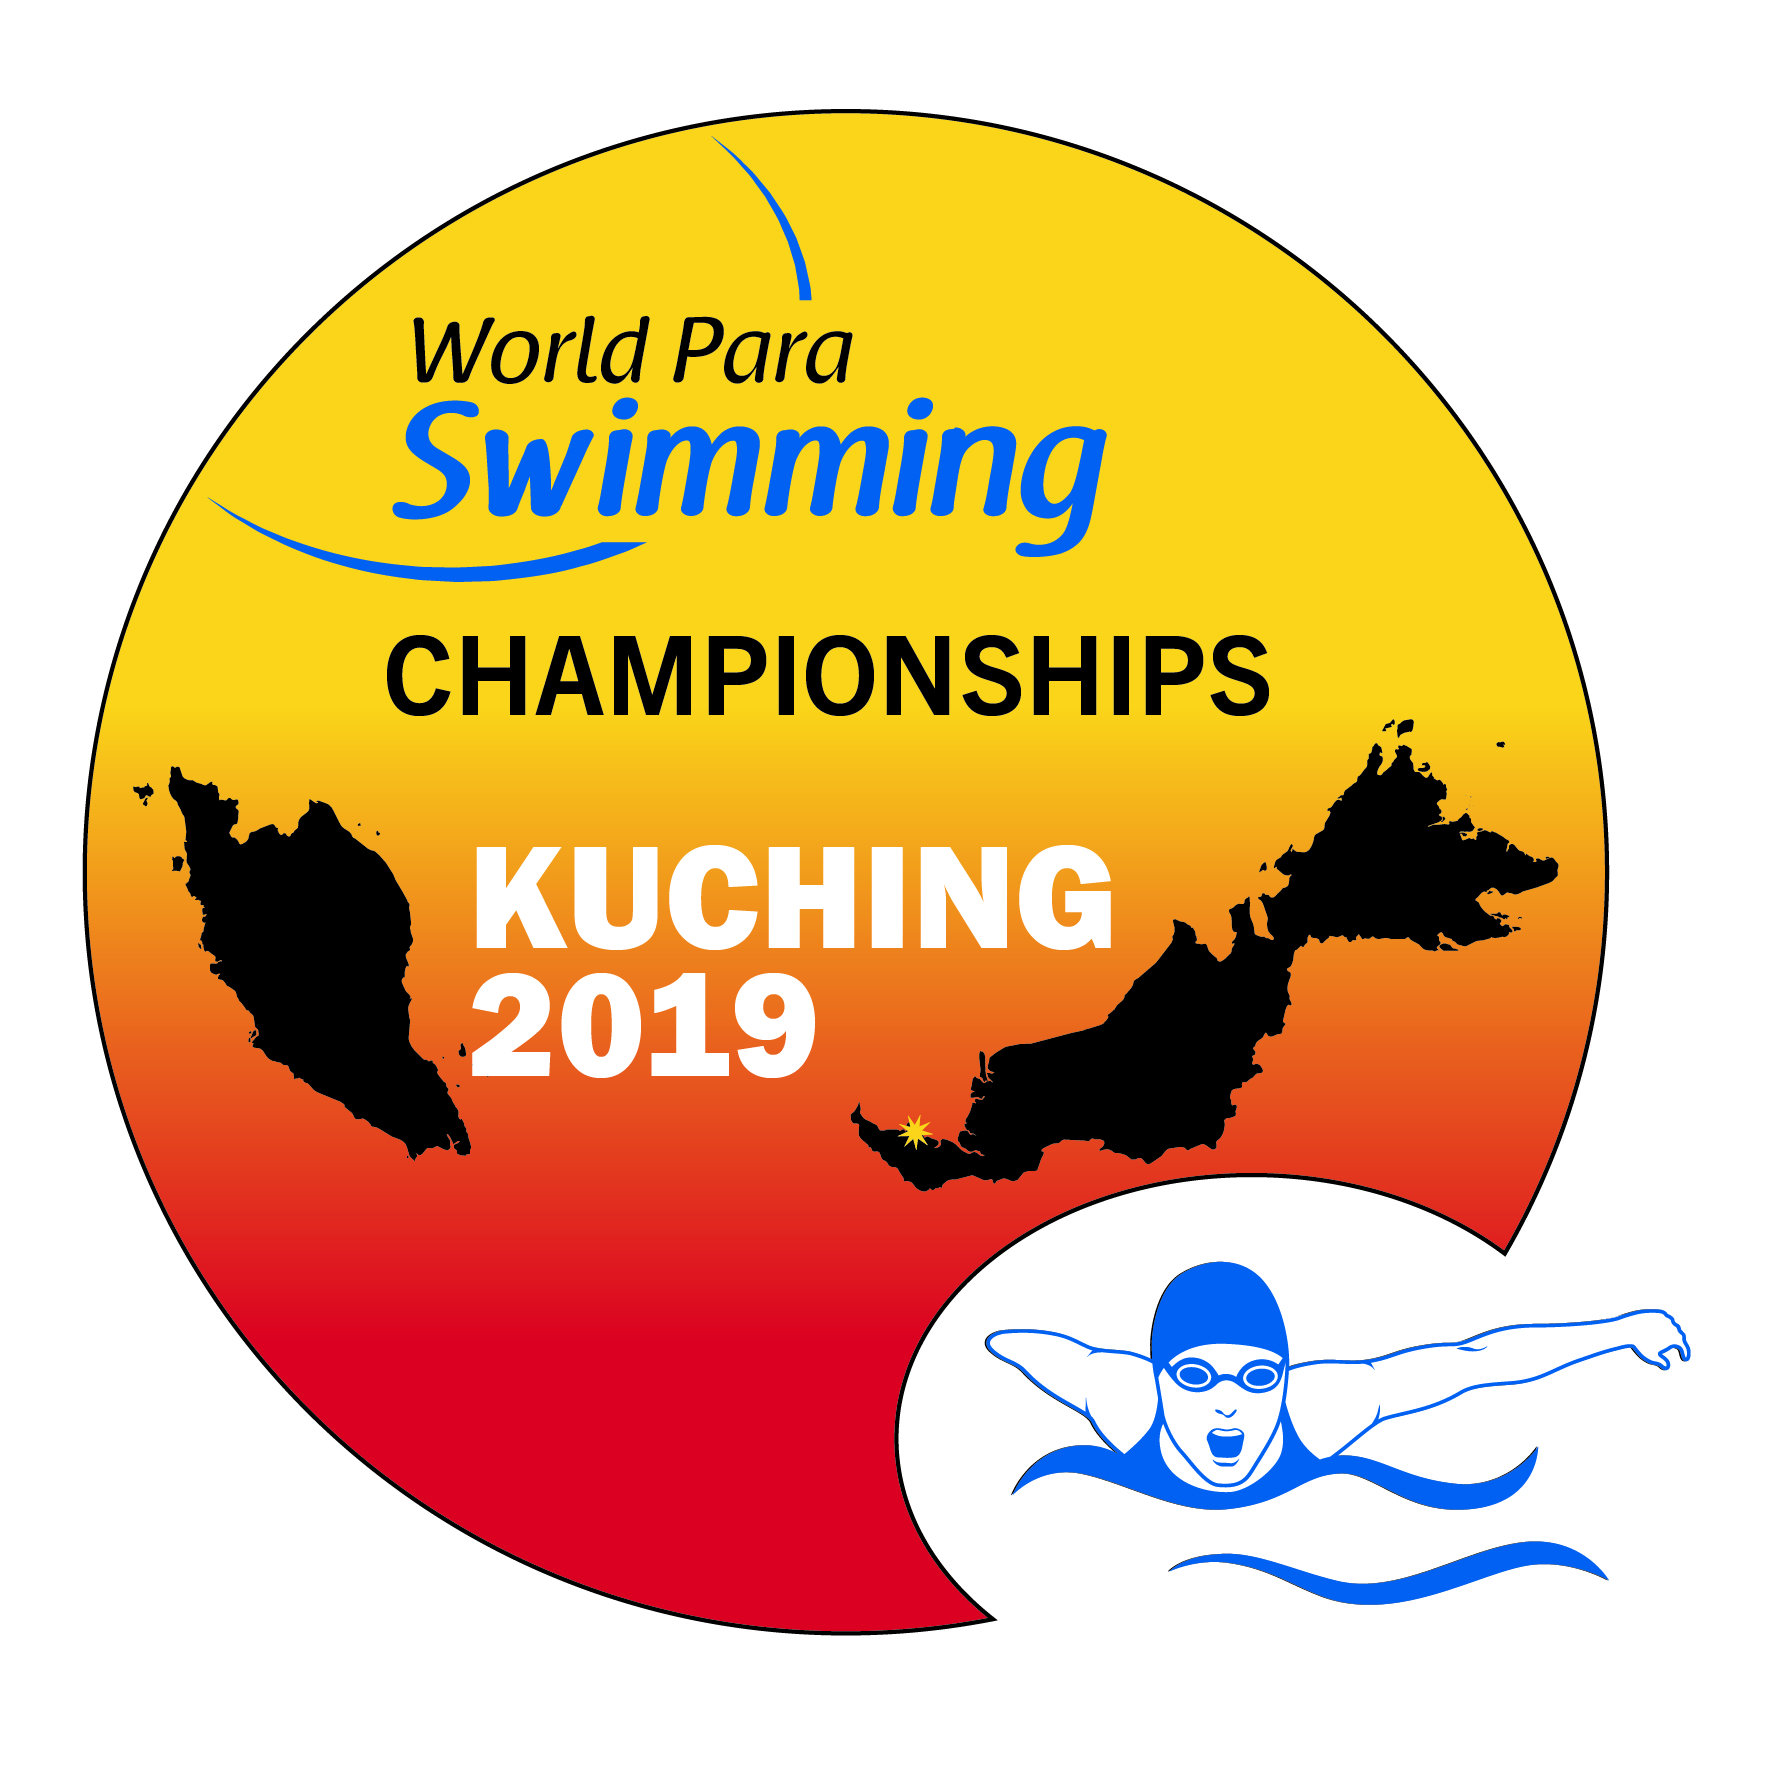 the official logo of the Kuching 2019 World Para Swimming Championships